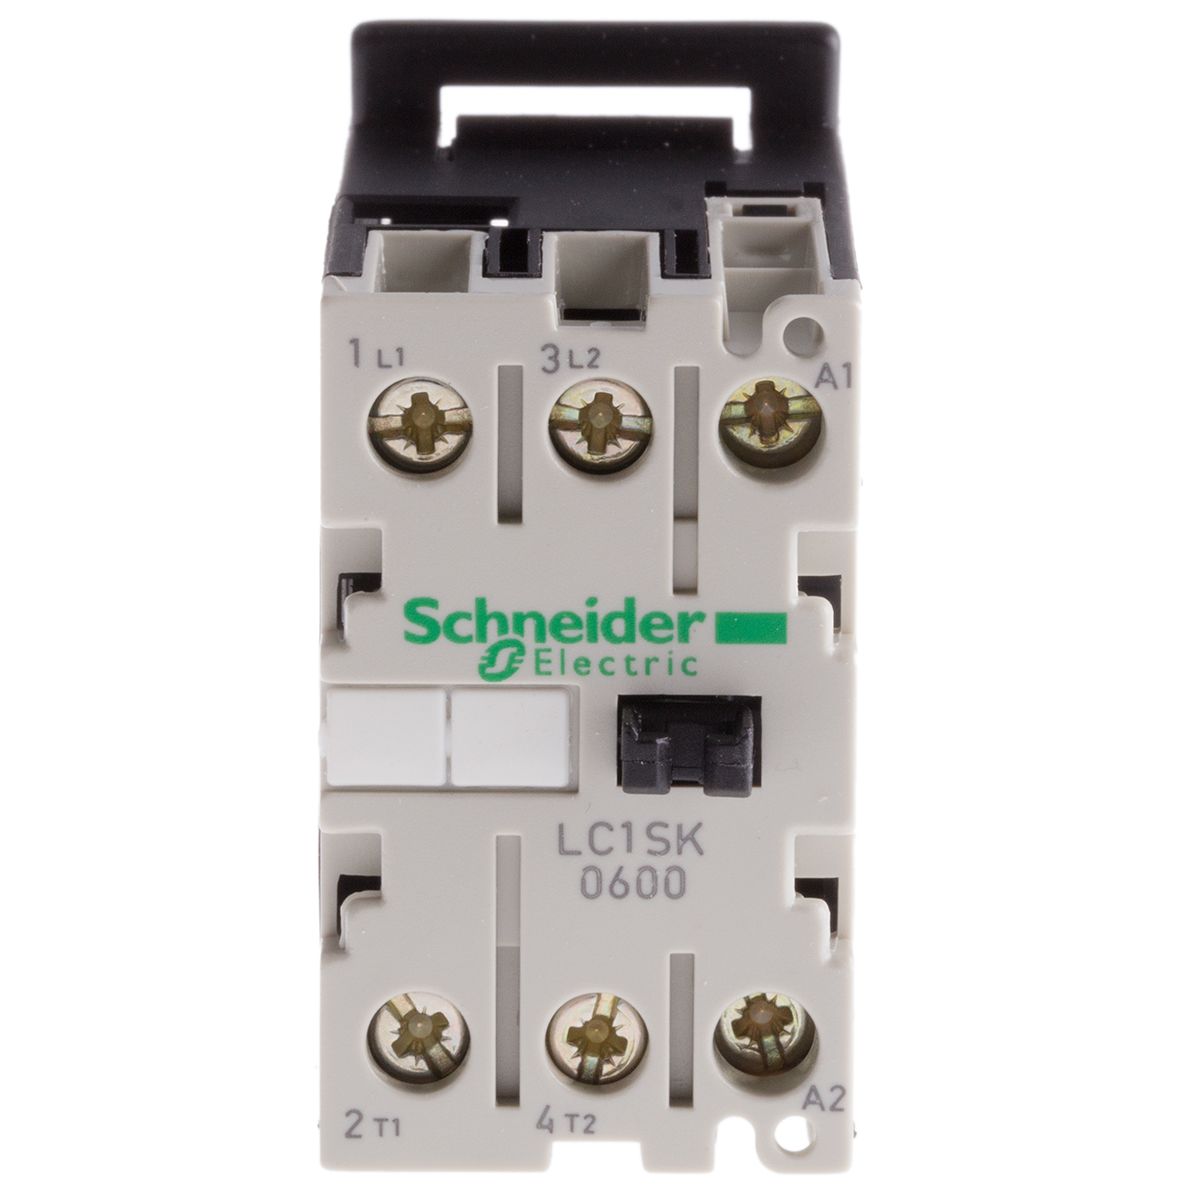 Schneider Electric TeSys SK LC1S Contactor, 24 V ac Coil, 2 Pole, 6 A, 2NO